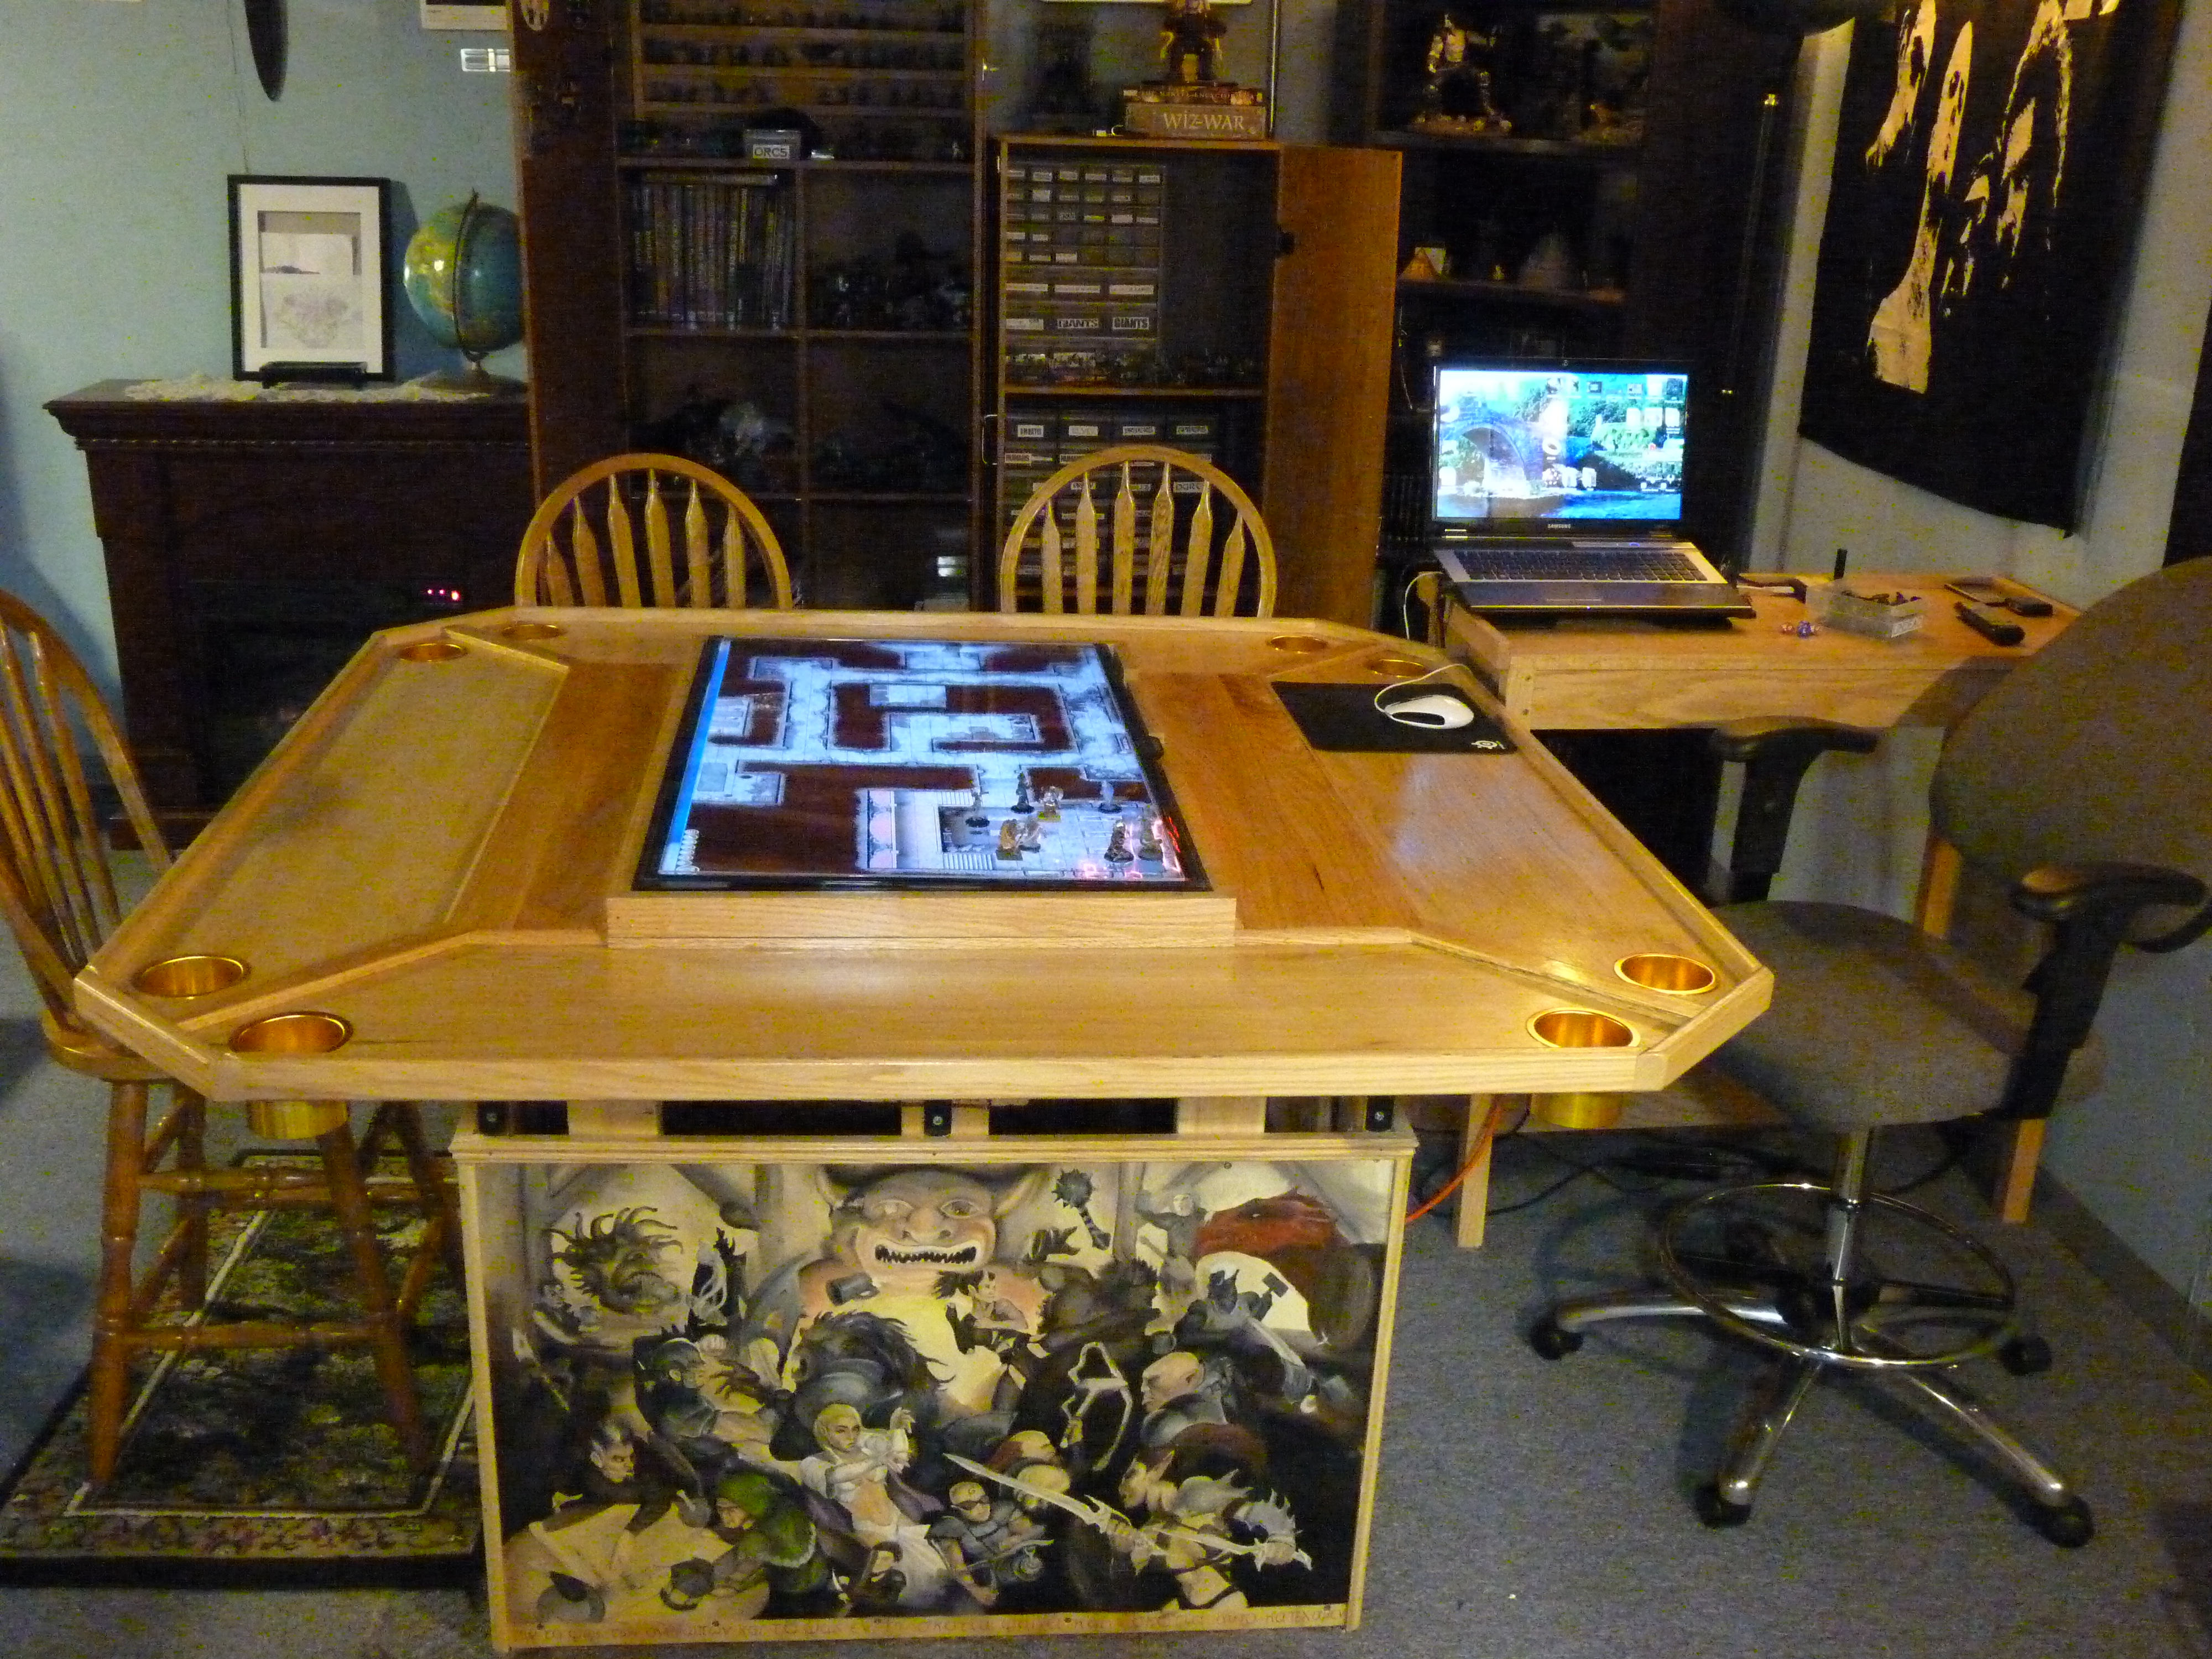 Simple Table Games For Game Room for Gamers